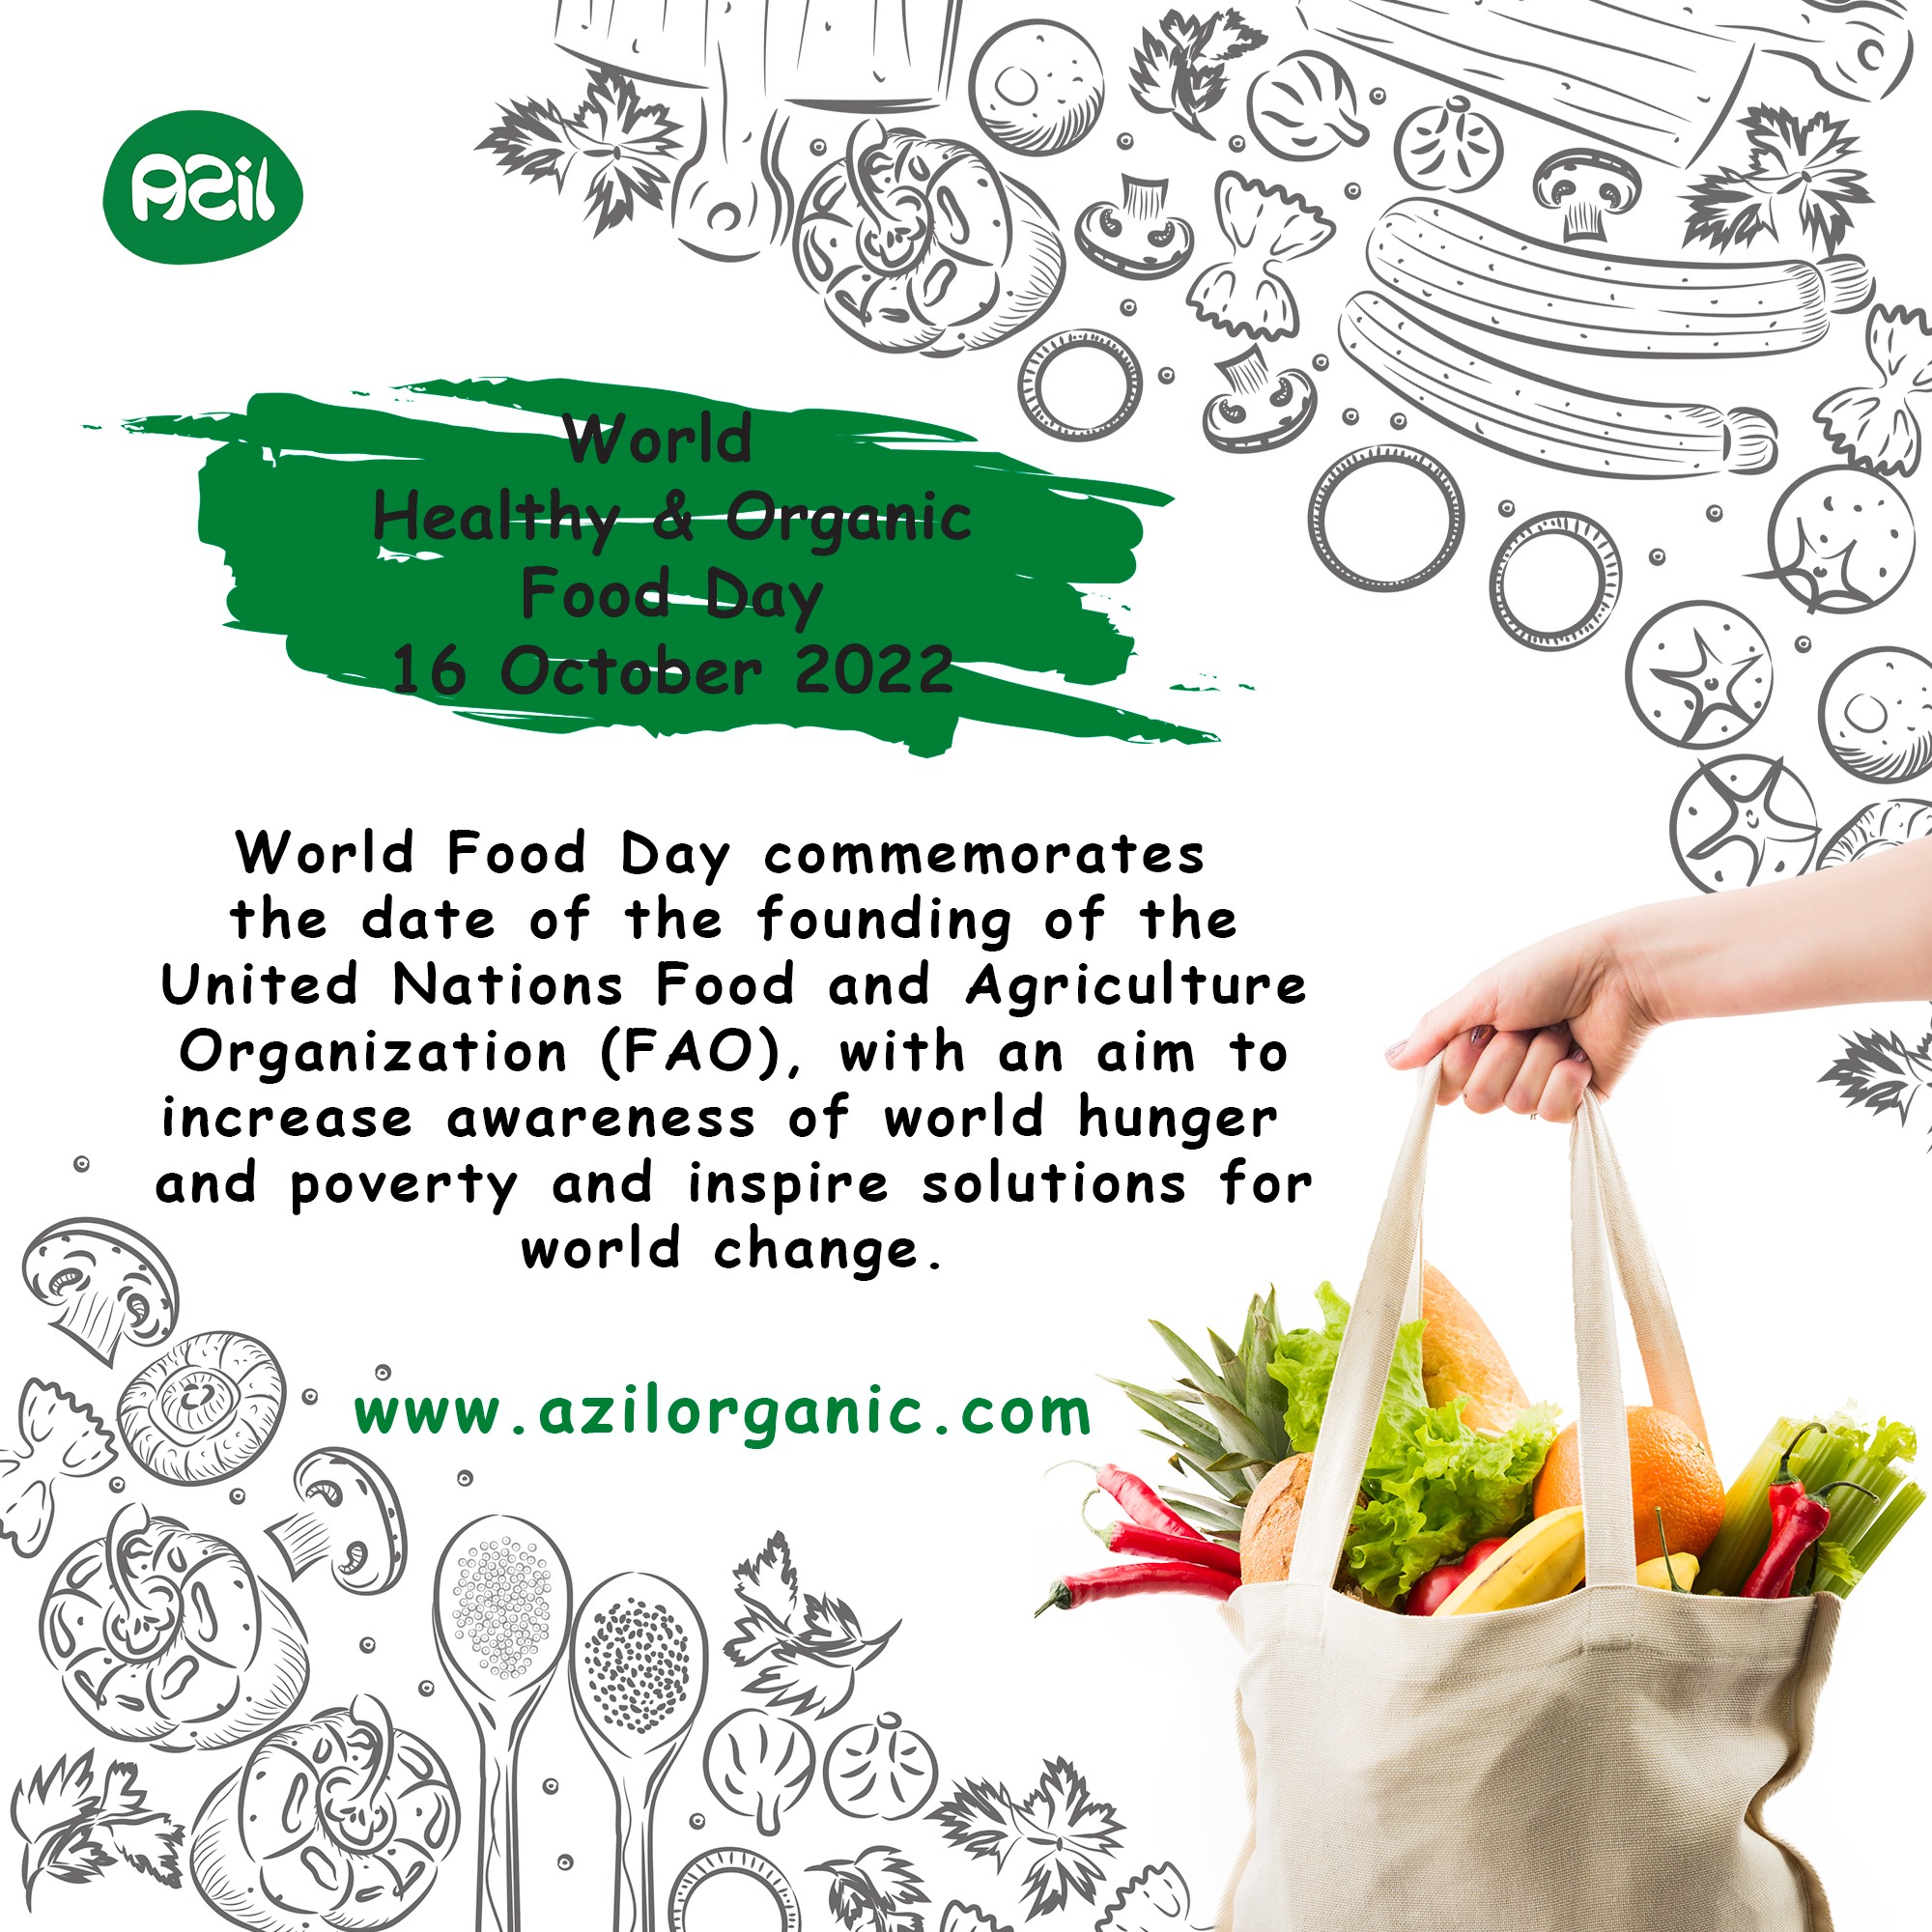 World Healthy and Organic Food Day - World Healthy and Organic Food Day